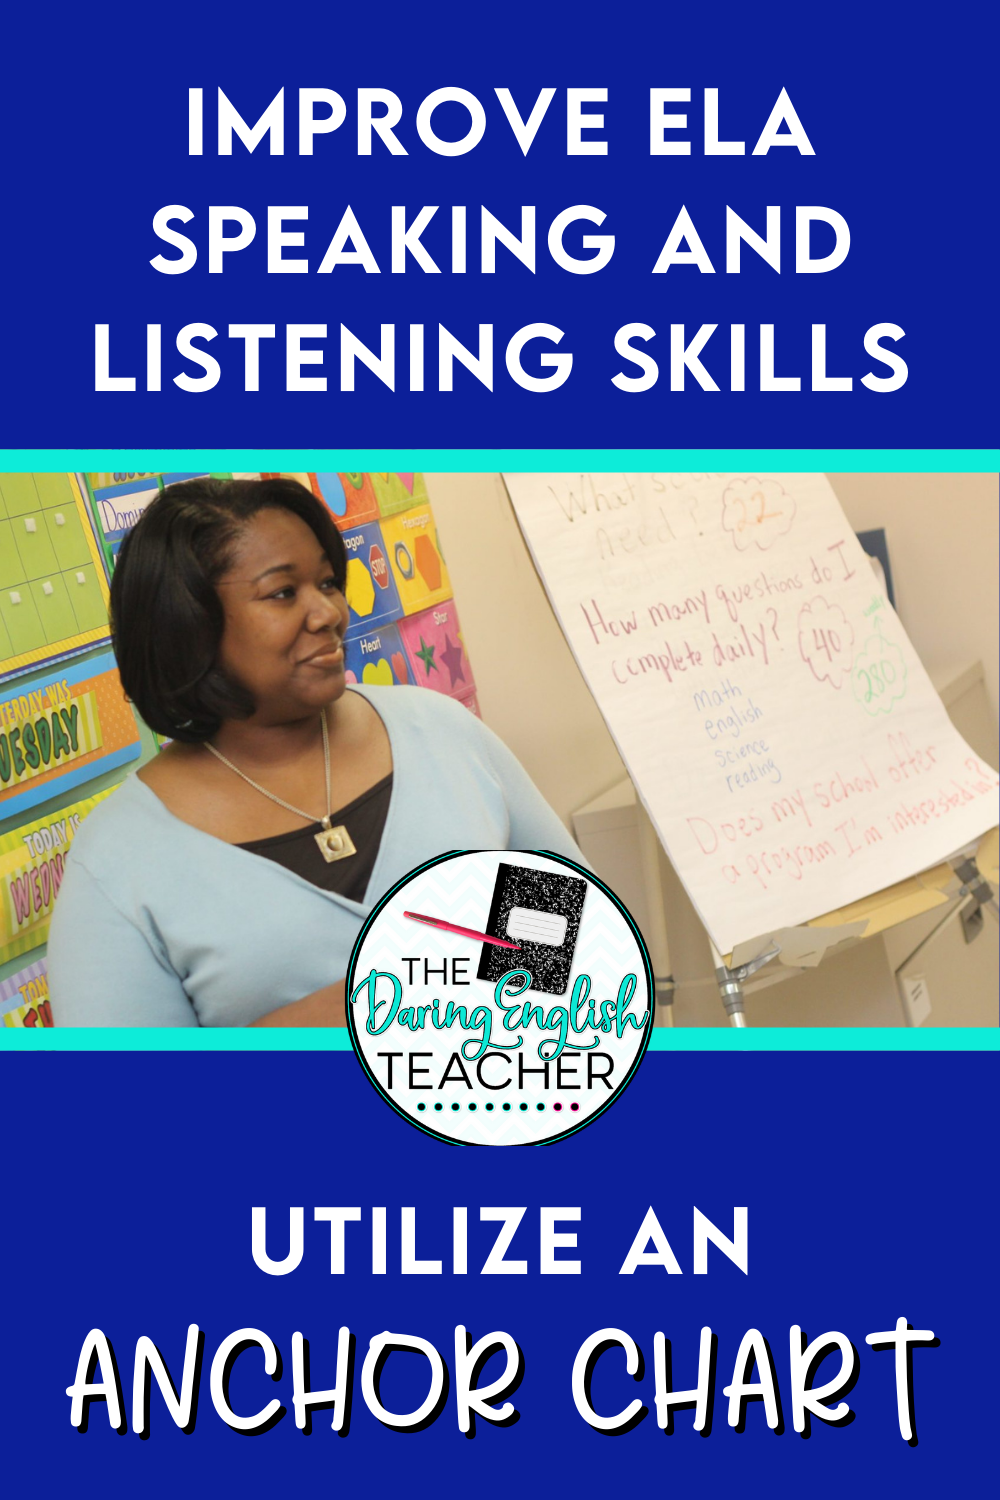 6 Activities for Teaching Speaking and Listening